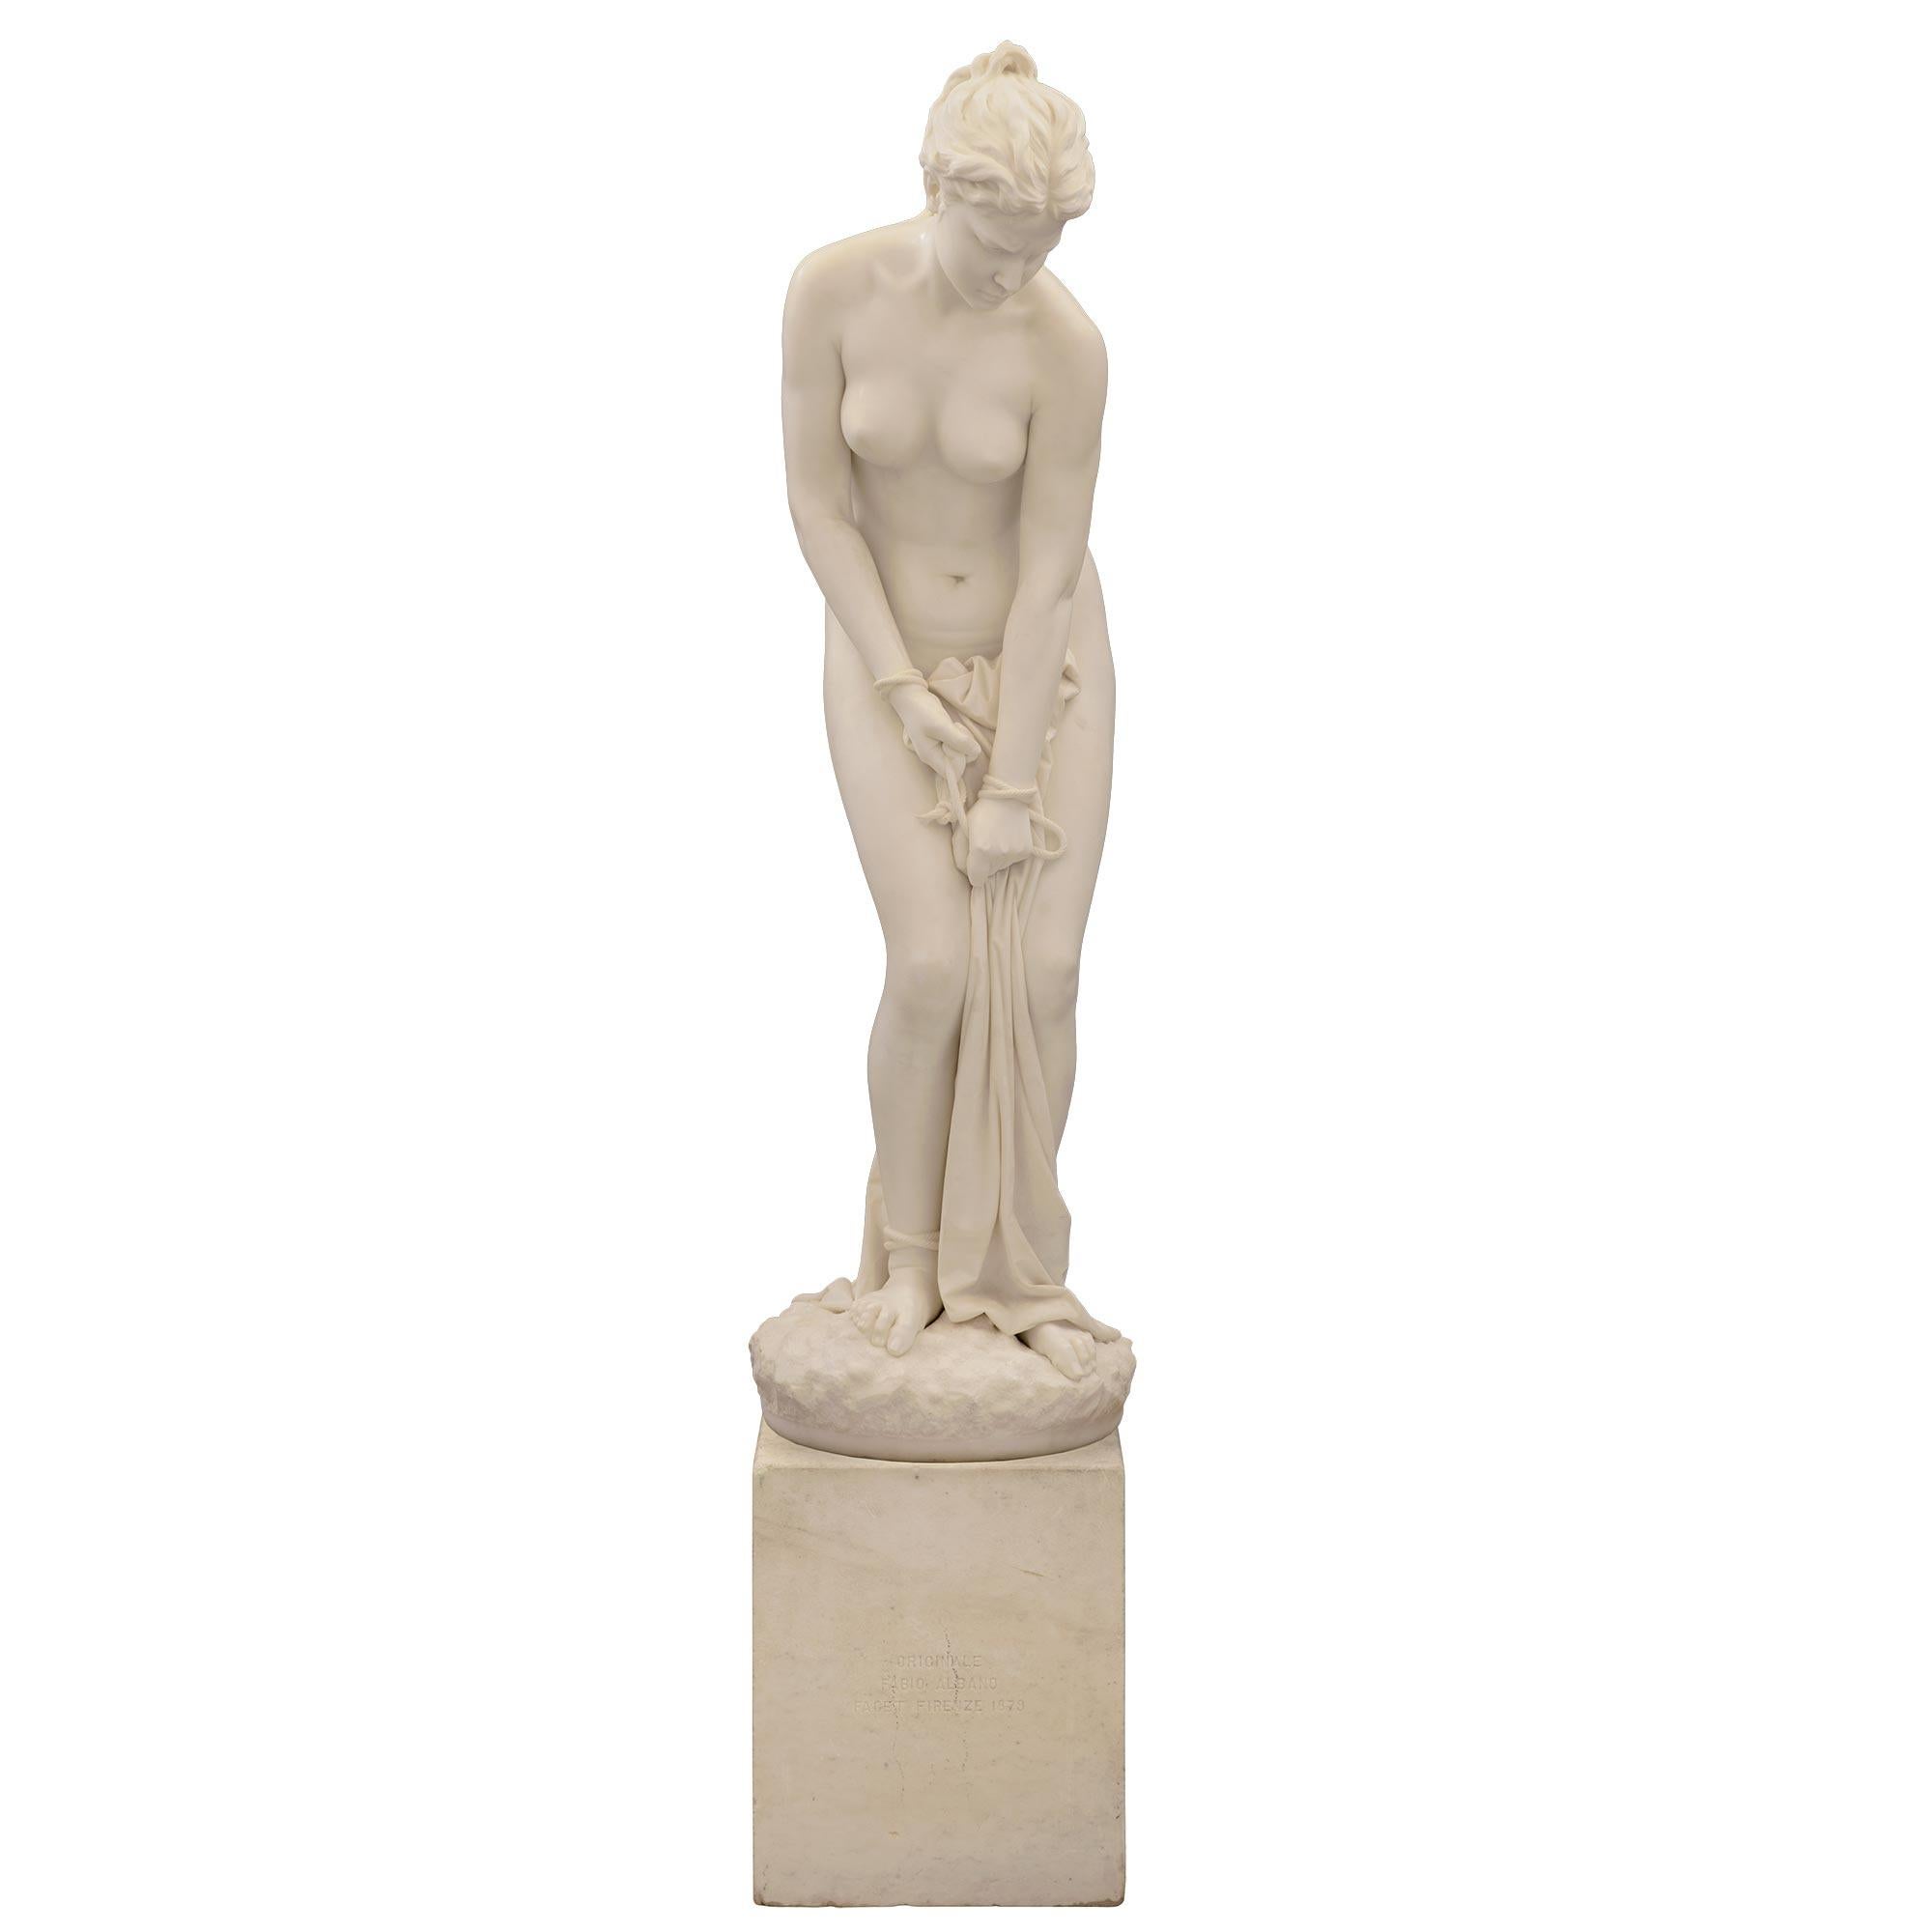 A stunning and extremely high quality Italian 19th century solid white Carrara marble statue of a woman with bound hands and feet. The statue, with a very unique subject matter, is raised on its original square base with 